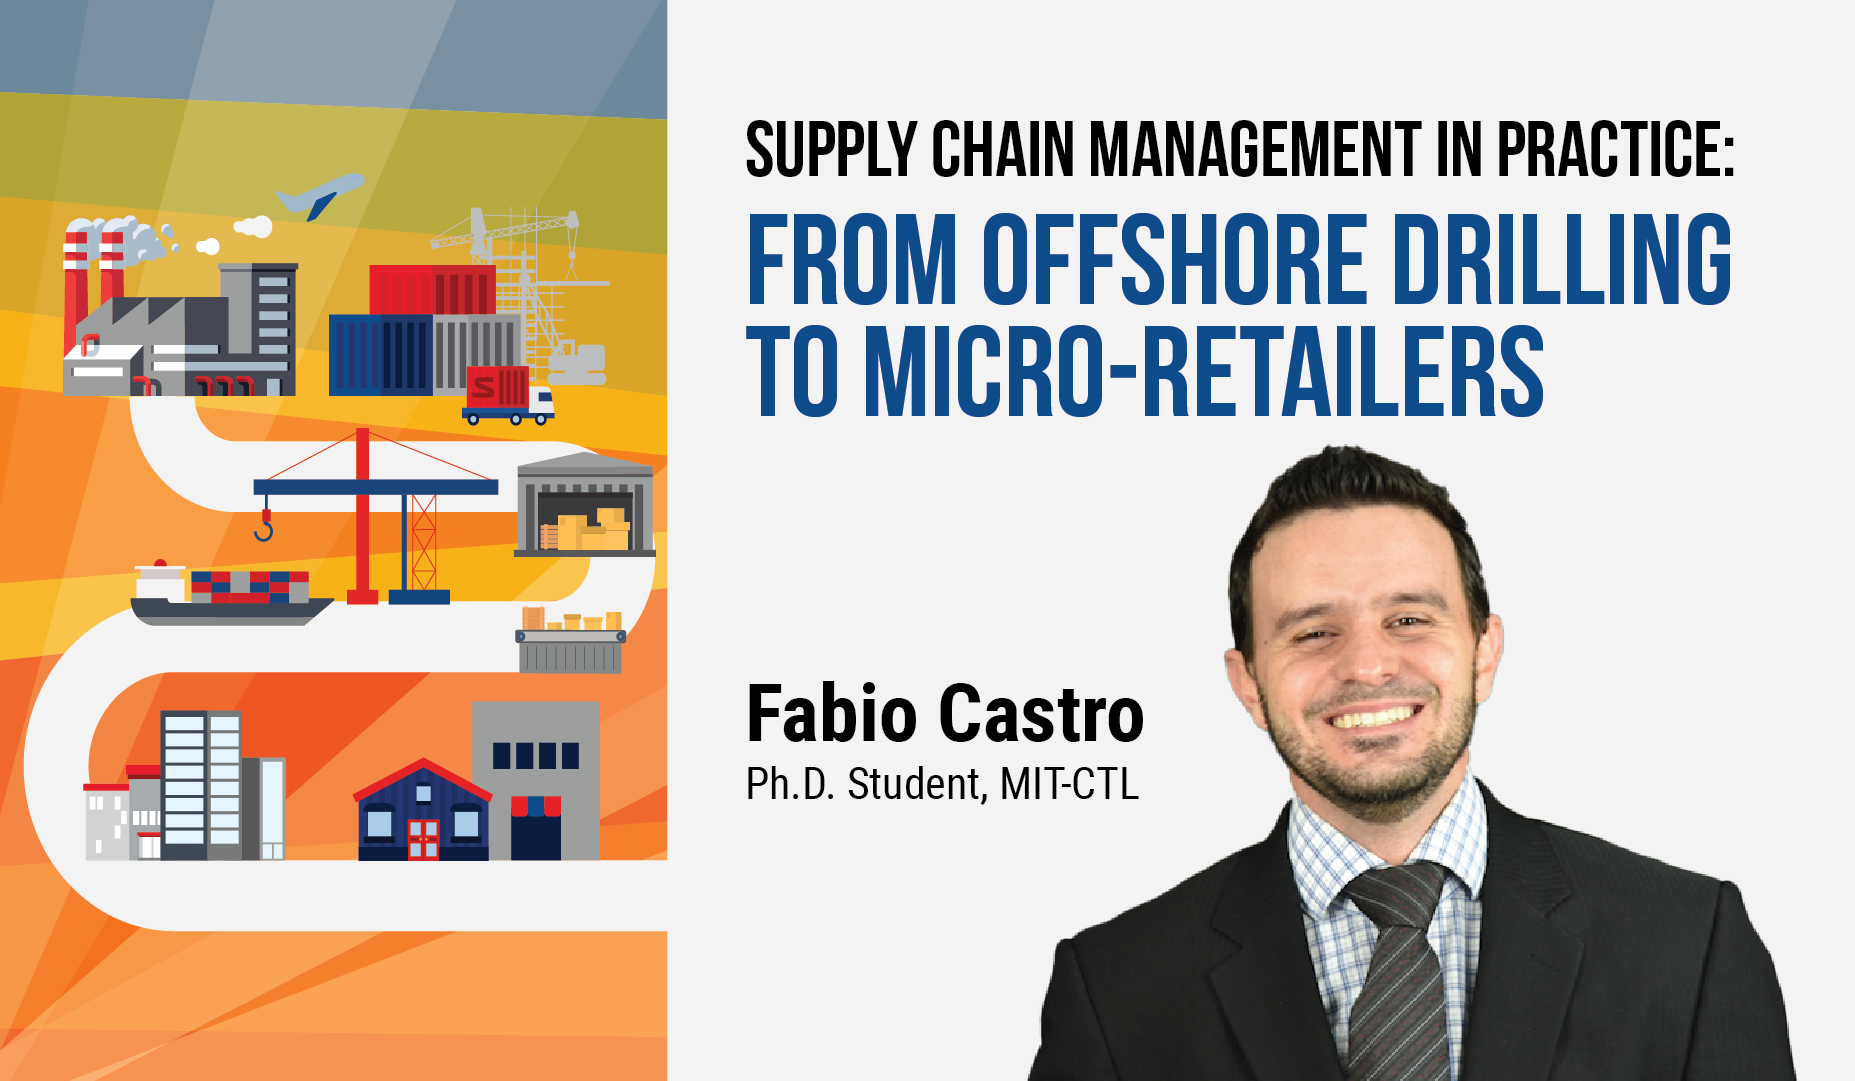 Supply Chain Management in Practice: From Offshore Drilling to Micro-Retailers